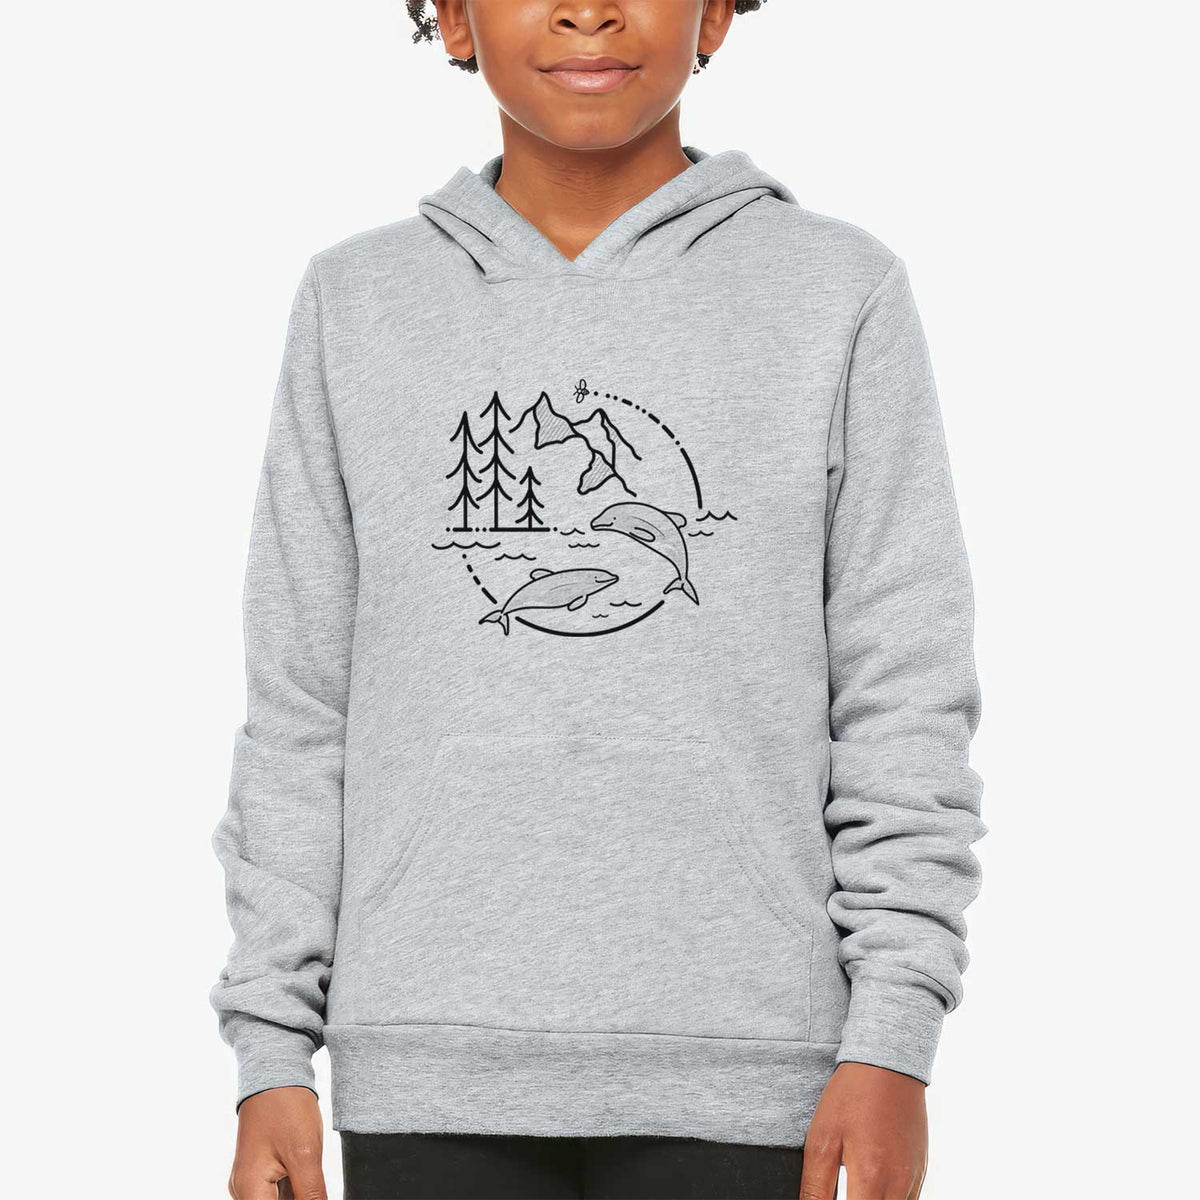 It&#39;s All Connected - Maui Dolphins - Youth Hoodie Sweatshirt